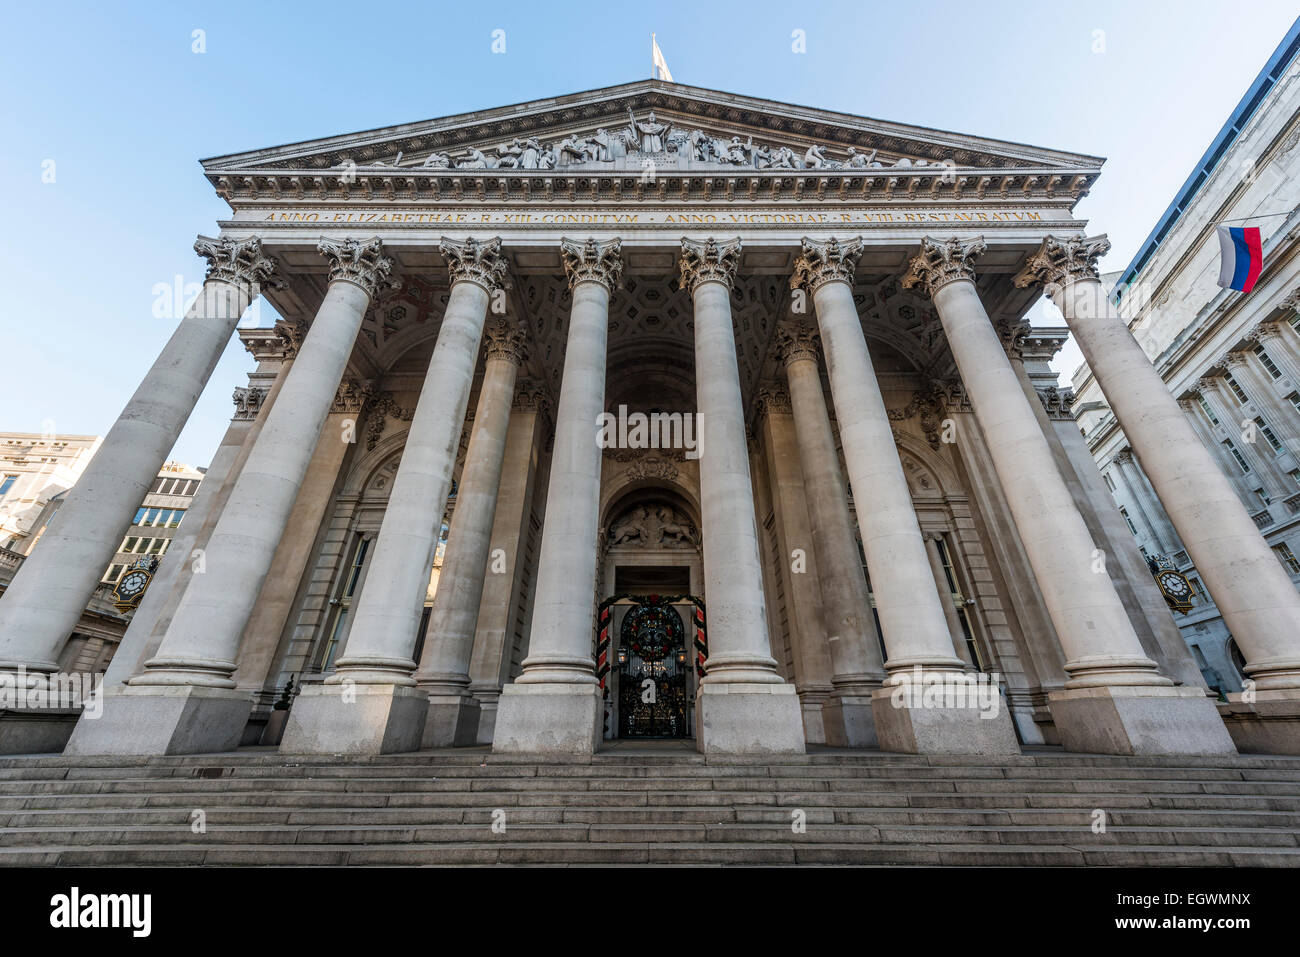 The Corinthian columns of the facade of the Royal Exchange in the City of London Stock Photo